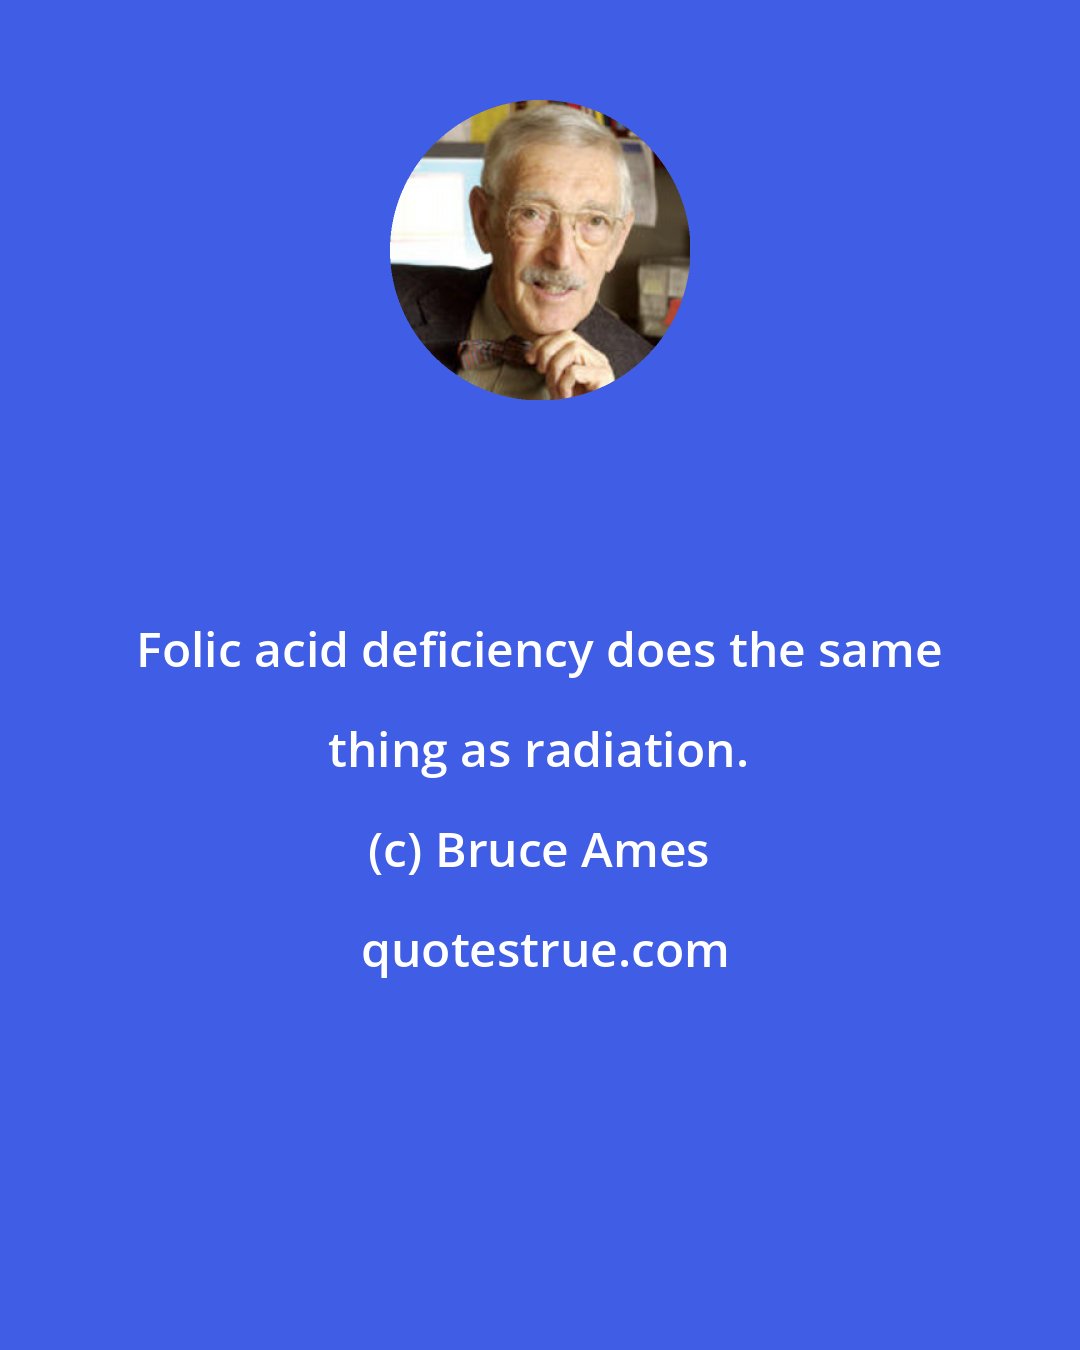 Bruce Ames: Folic acid deficiency does the same thing as radiation.